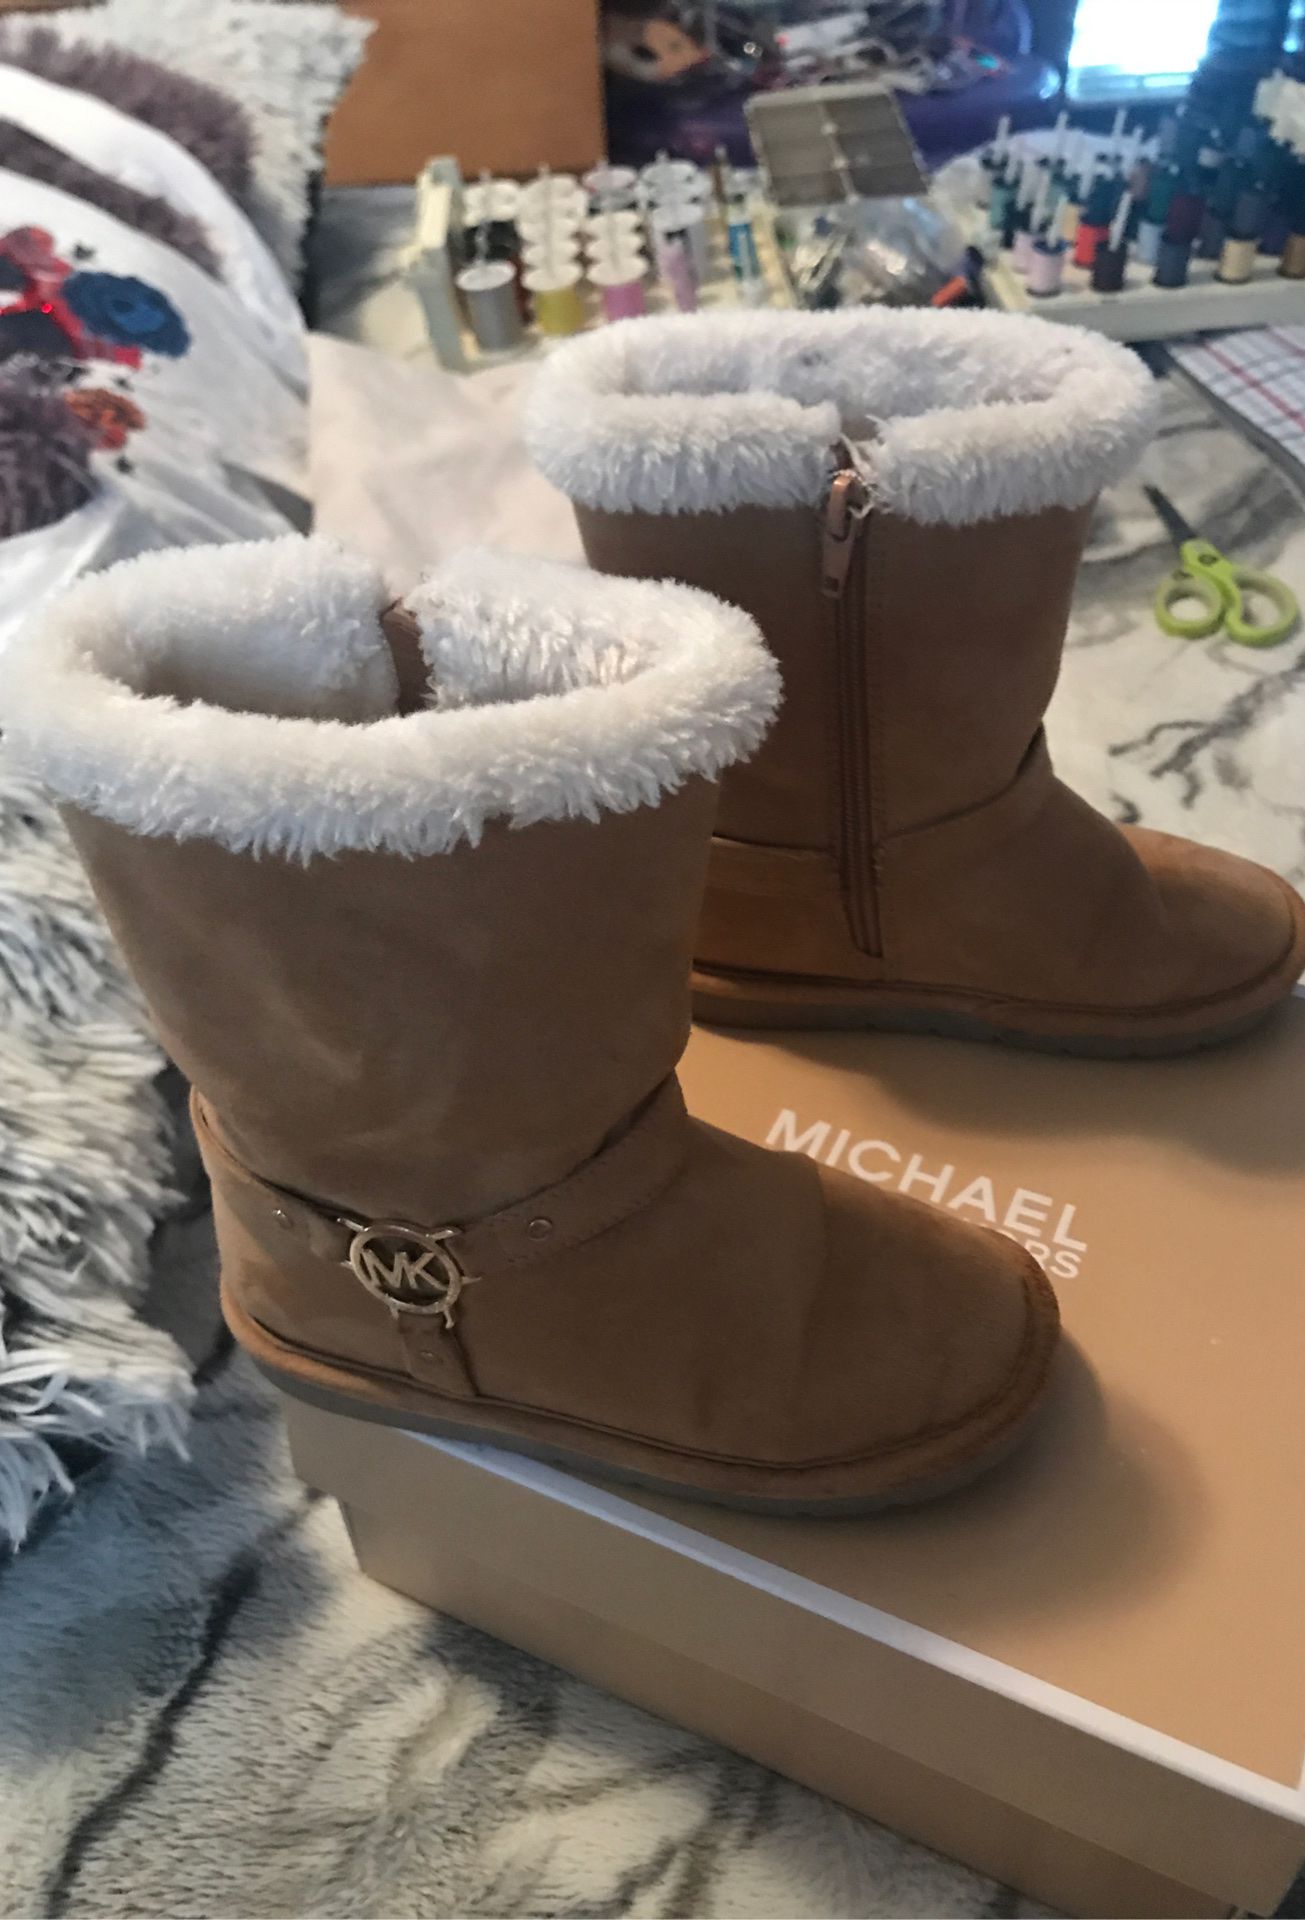 Michaels Kors boots for kids size 11